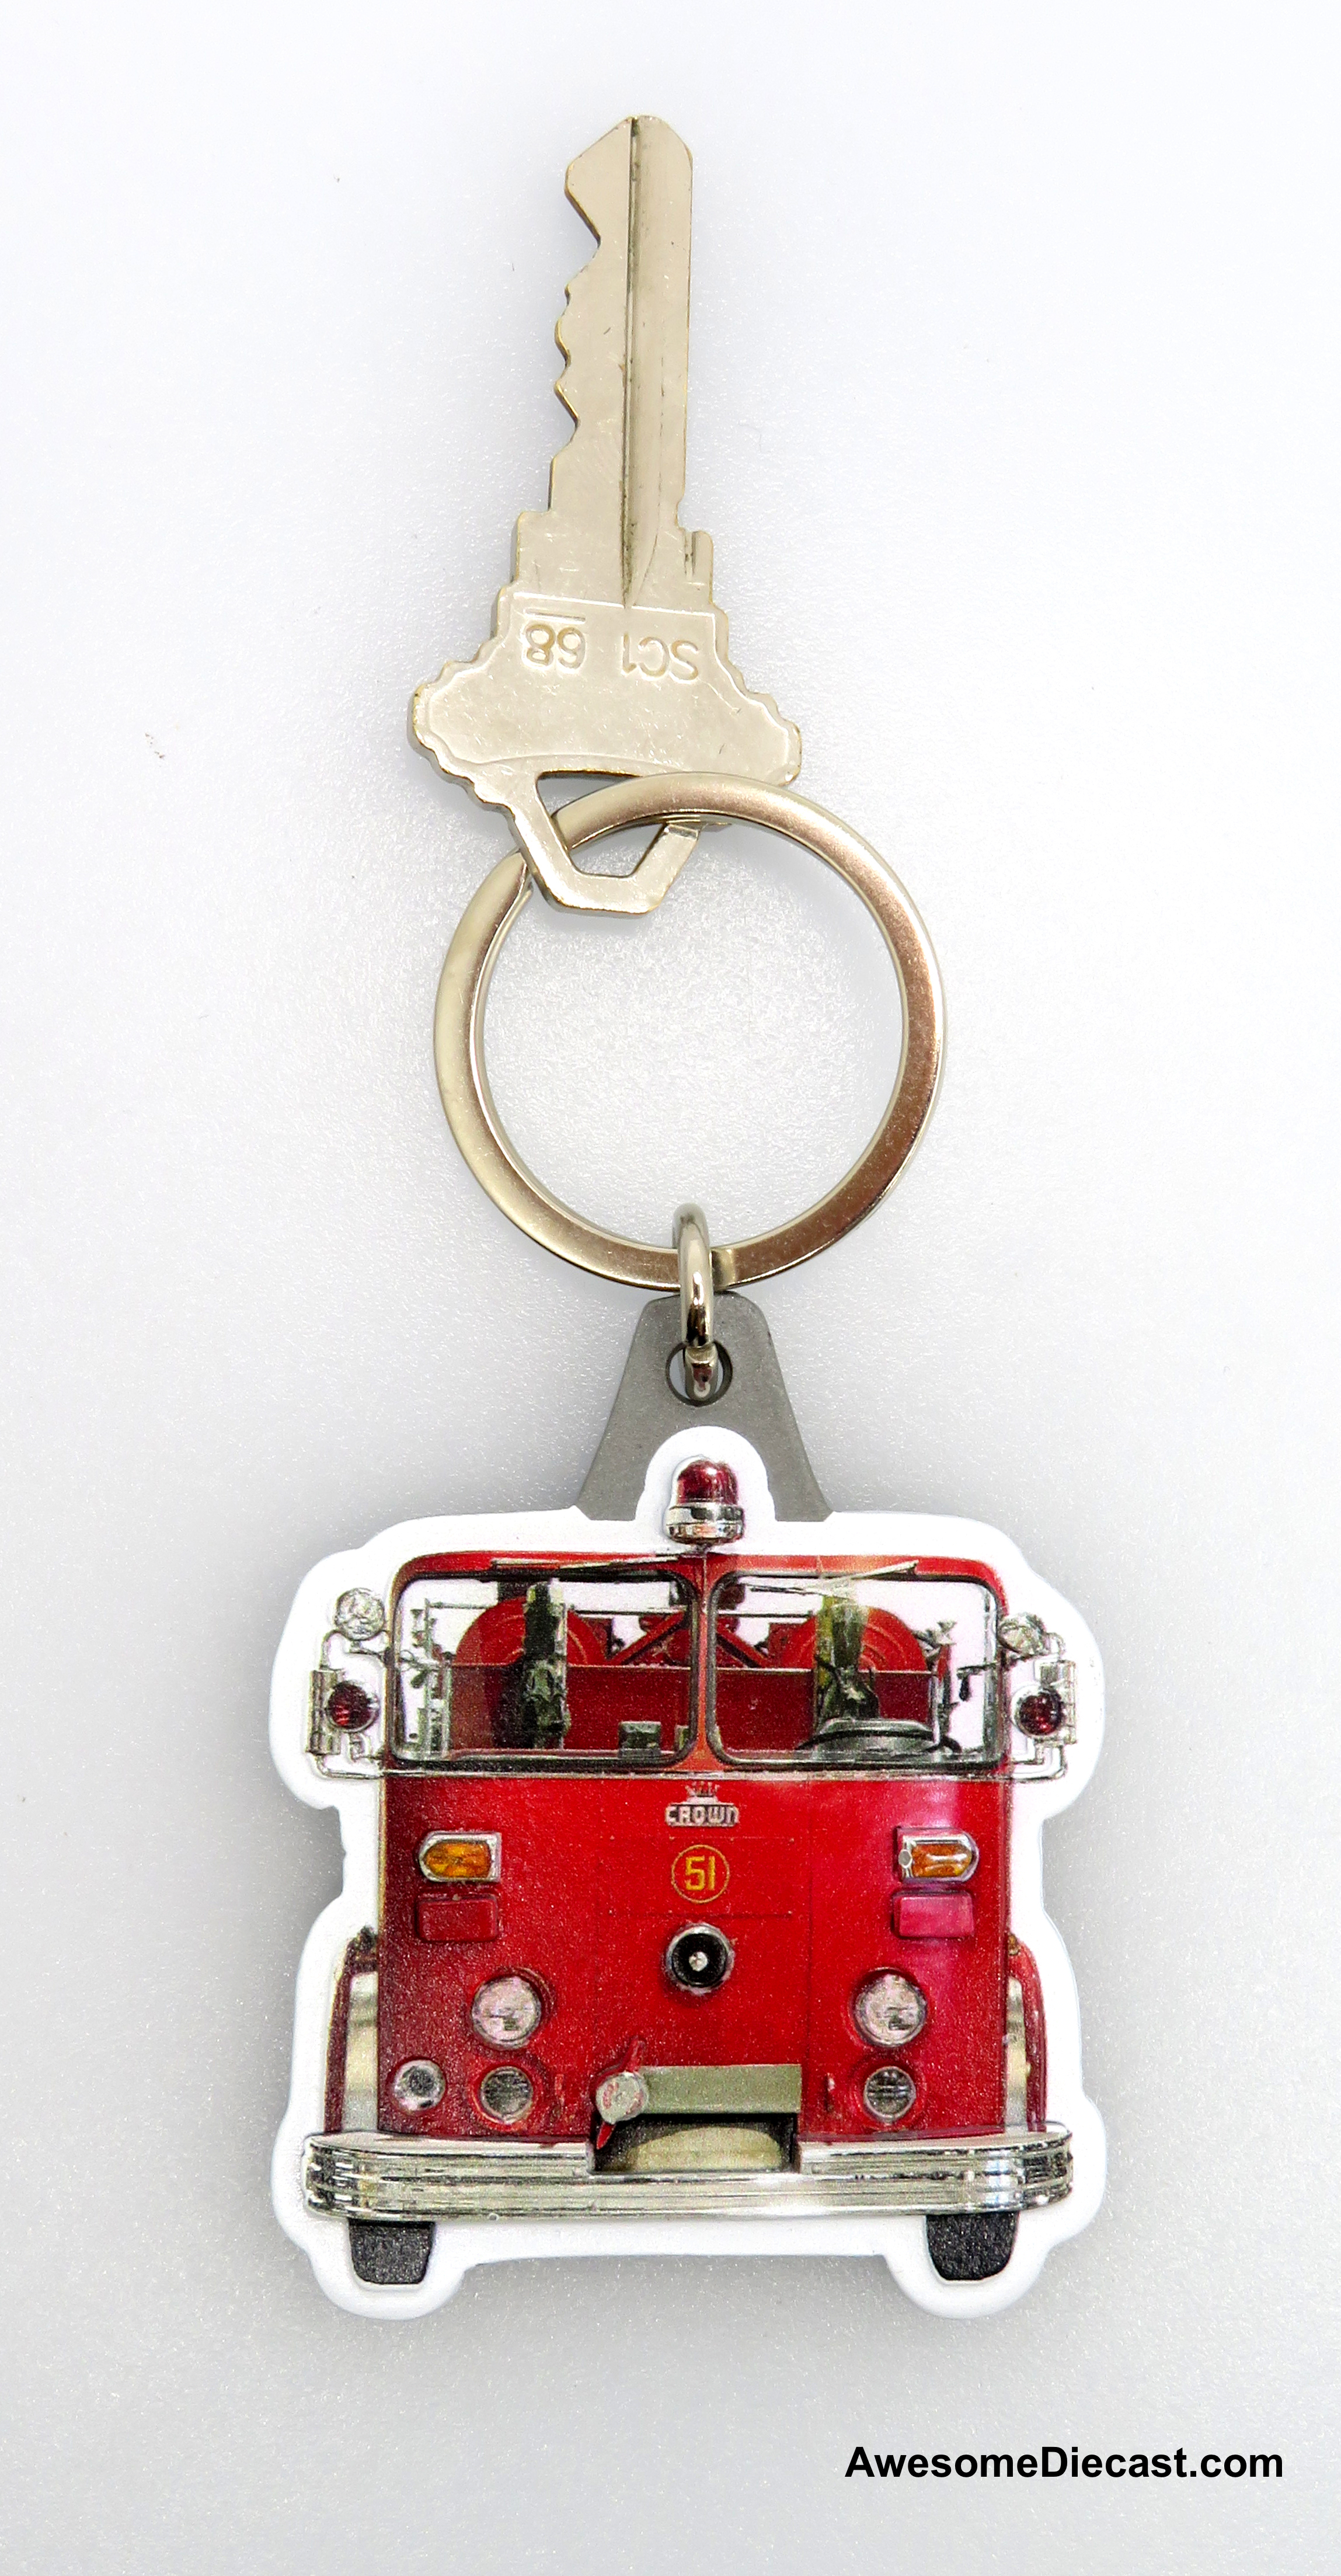 Iconic Replicas Limited 50th Anniversary Edition Metal Keychain: Crown Firecoach Engine 51